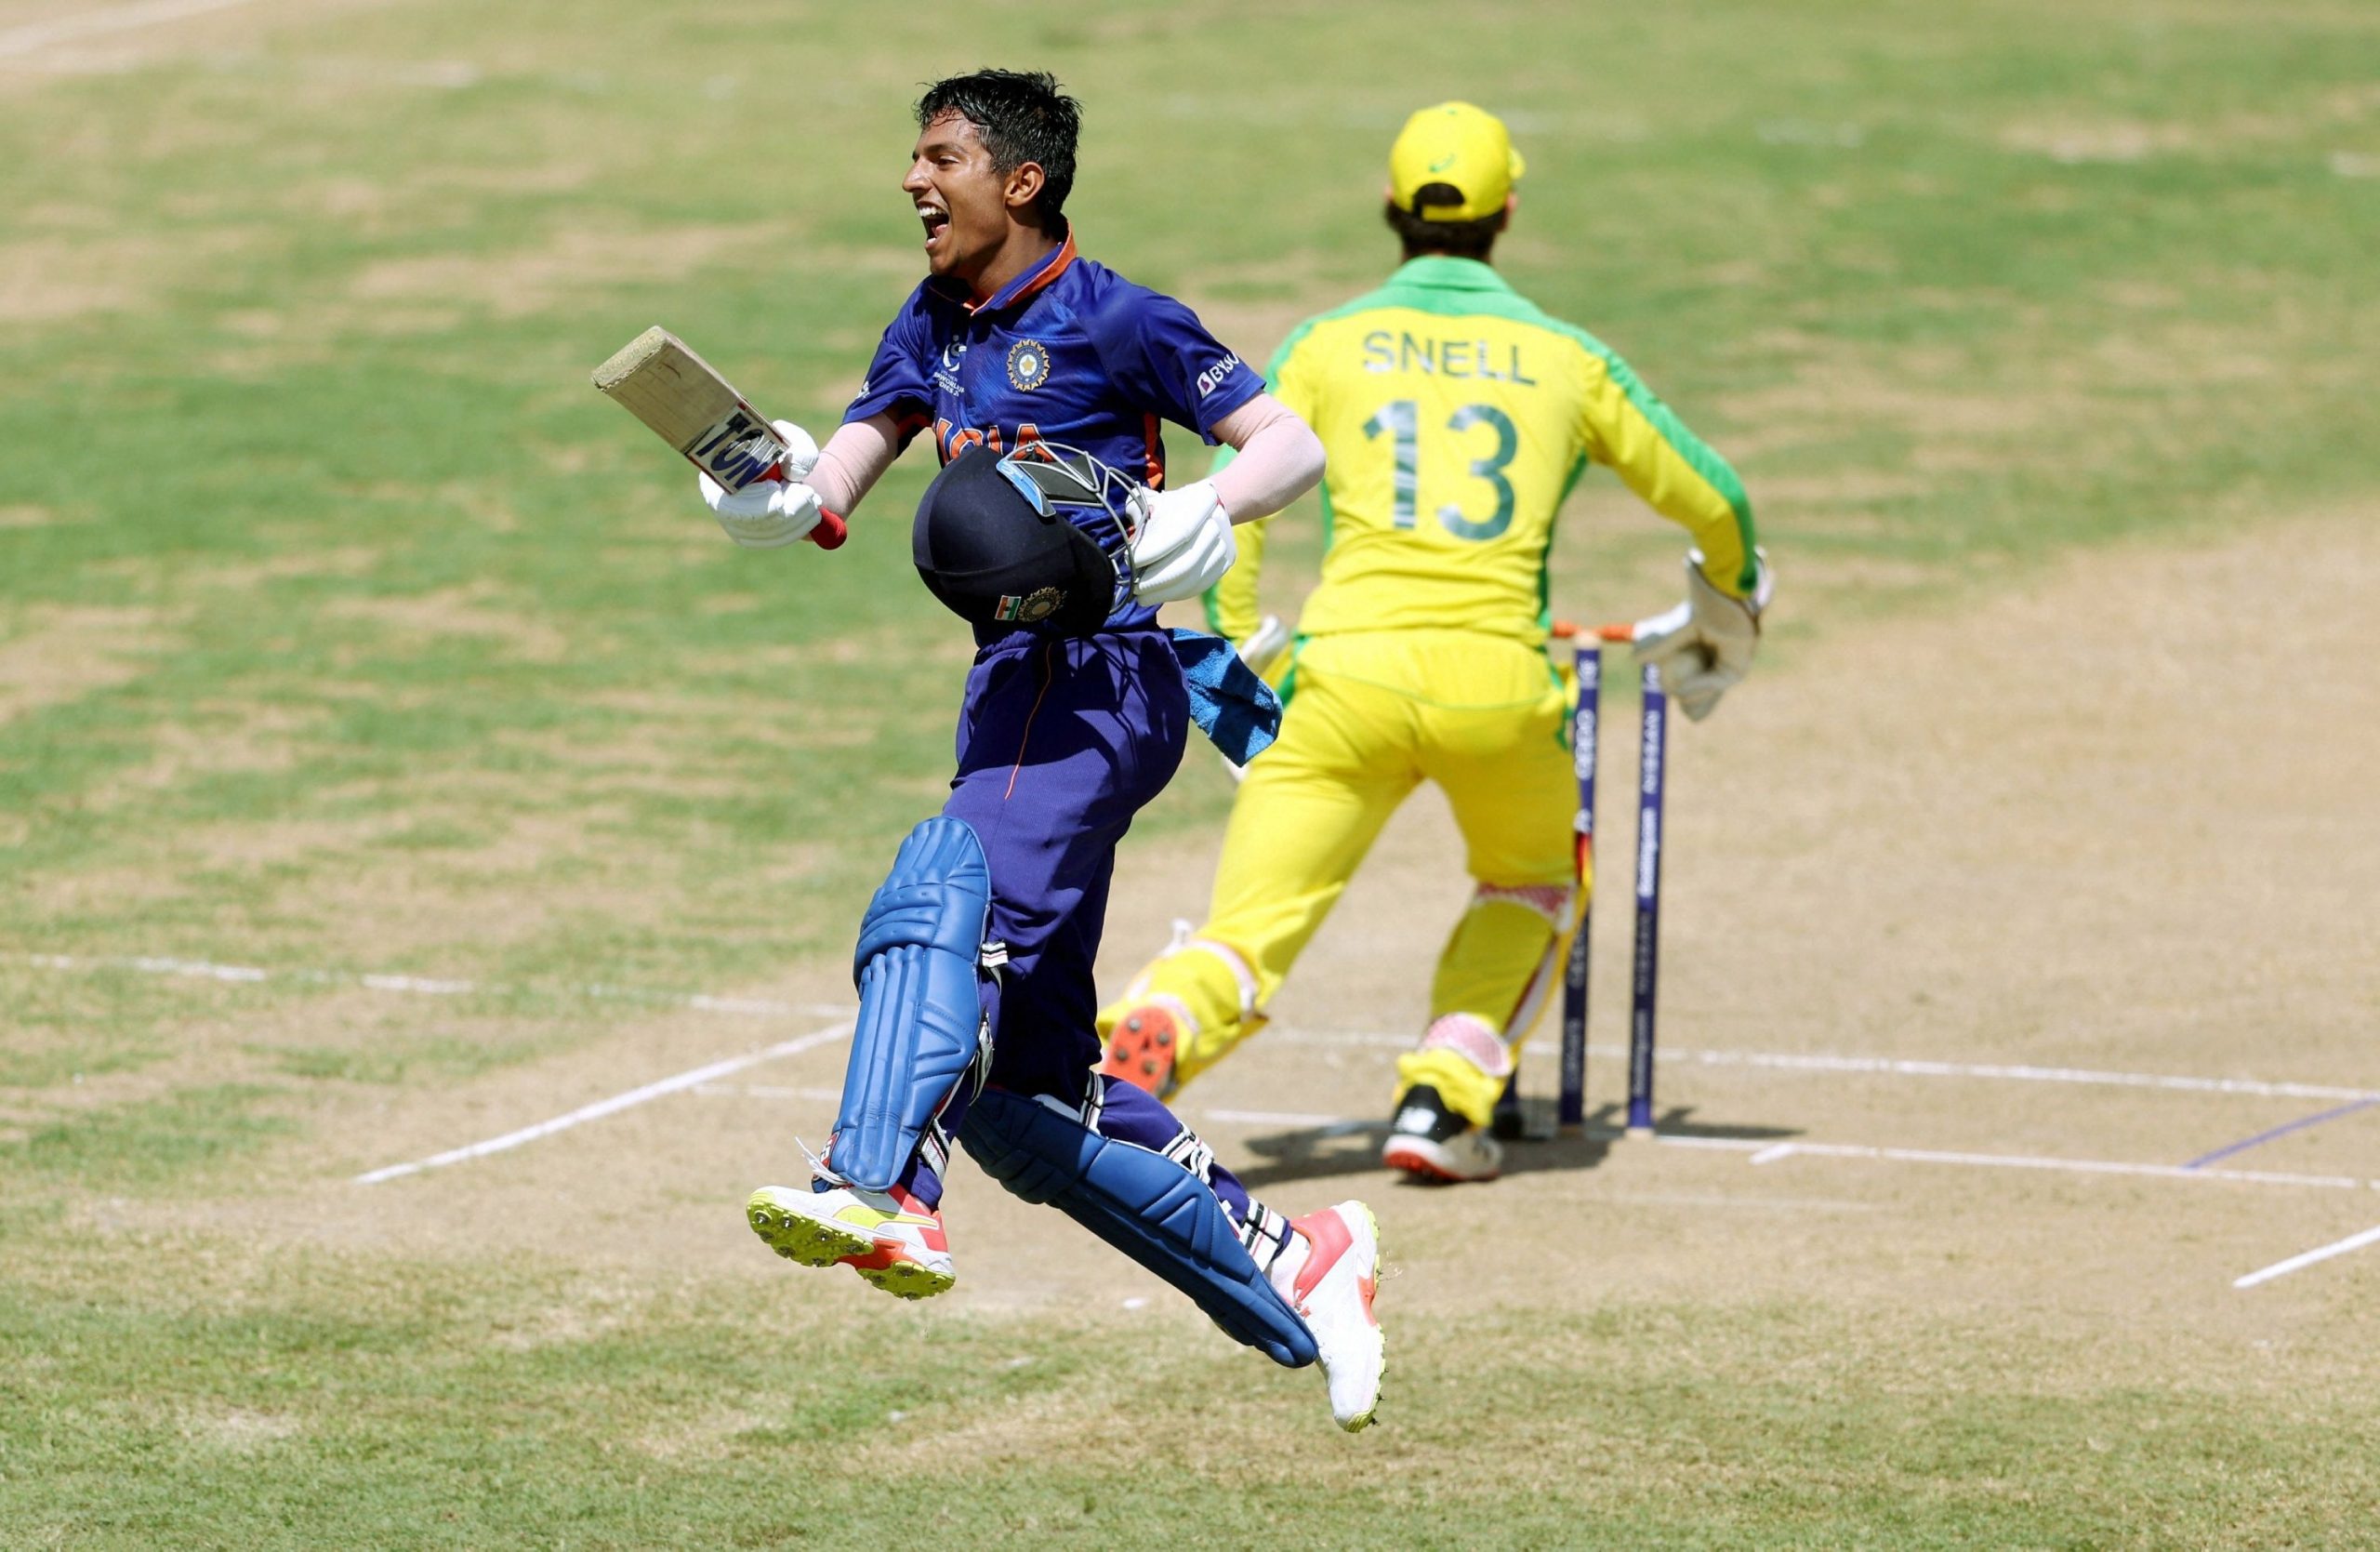 U-19 World Cup: Skipper Yash Dhull’s century helps India eliminate the Aussies